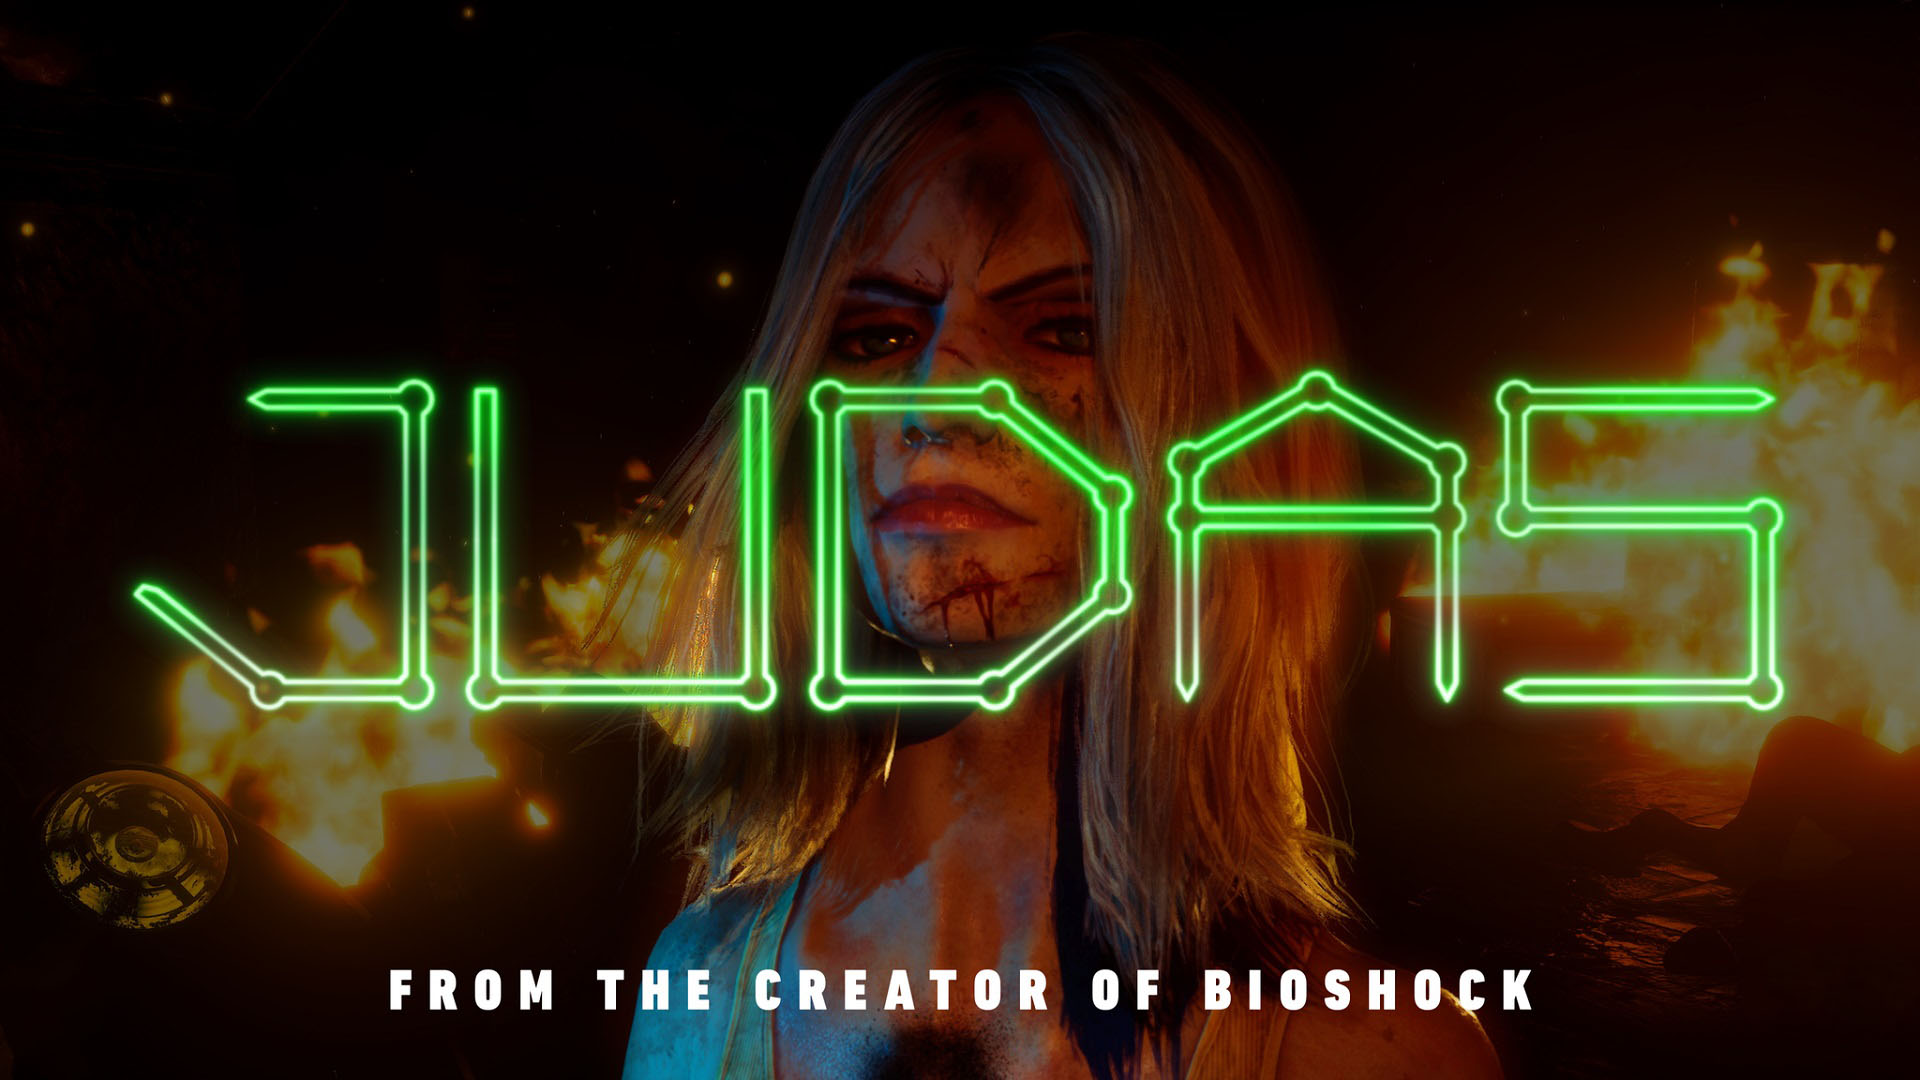 Judas announced by Ghost Story Games and BioShock creator Ken Levine